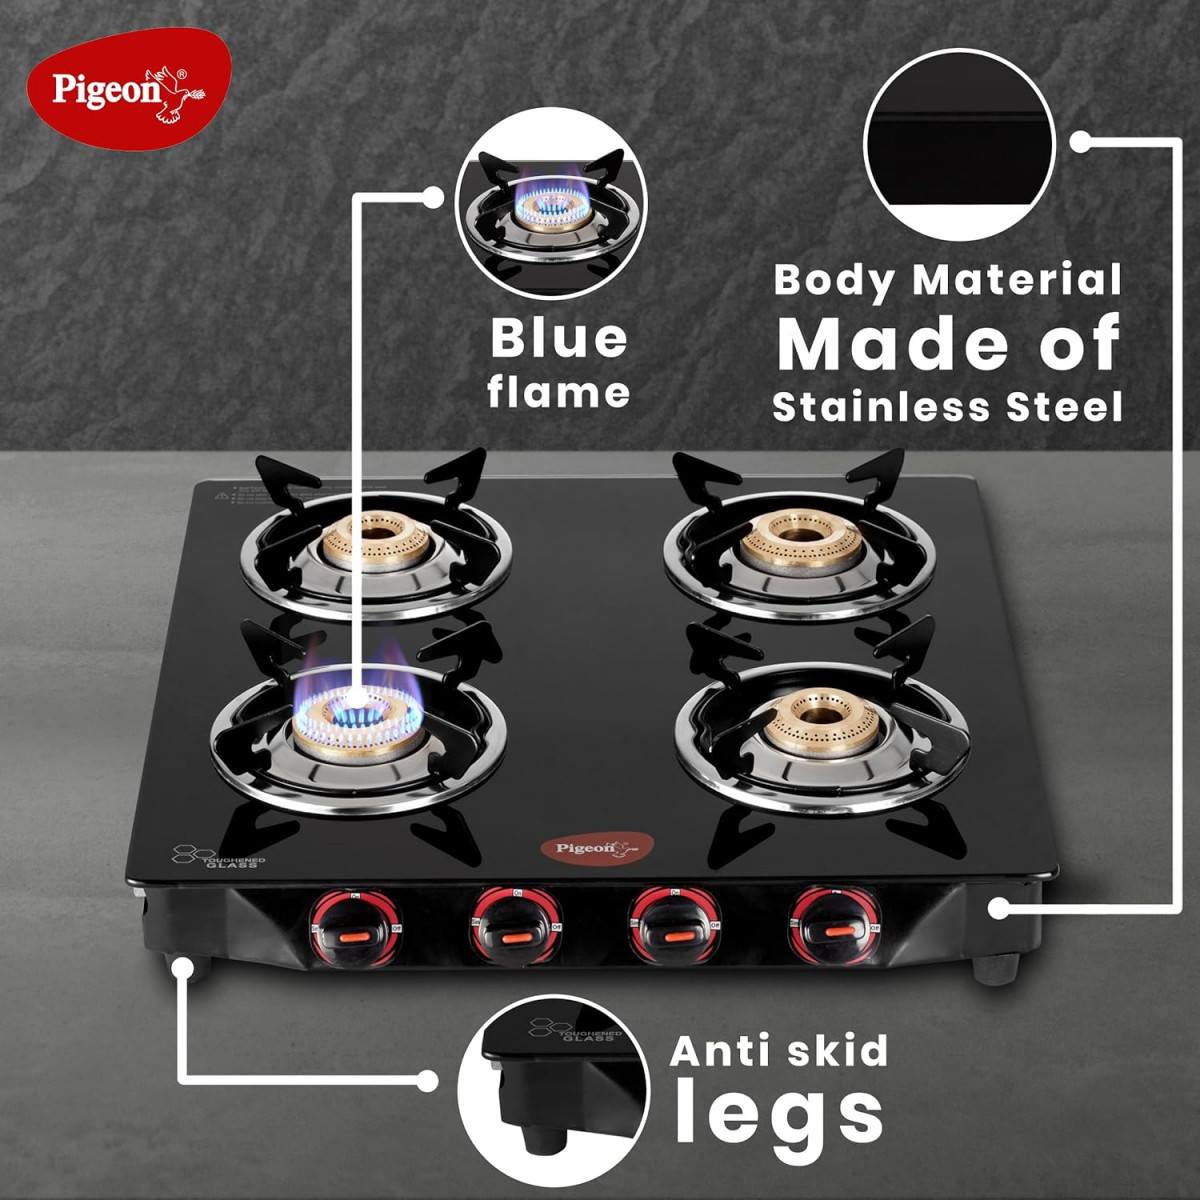 Pigeon by Stovekraft Aster Gas Stove 4 Burner with High Powered Brass Burner Gas Cooktop with Glass Top